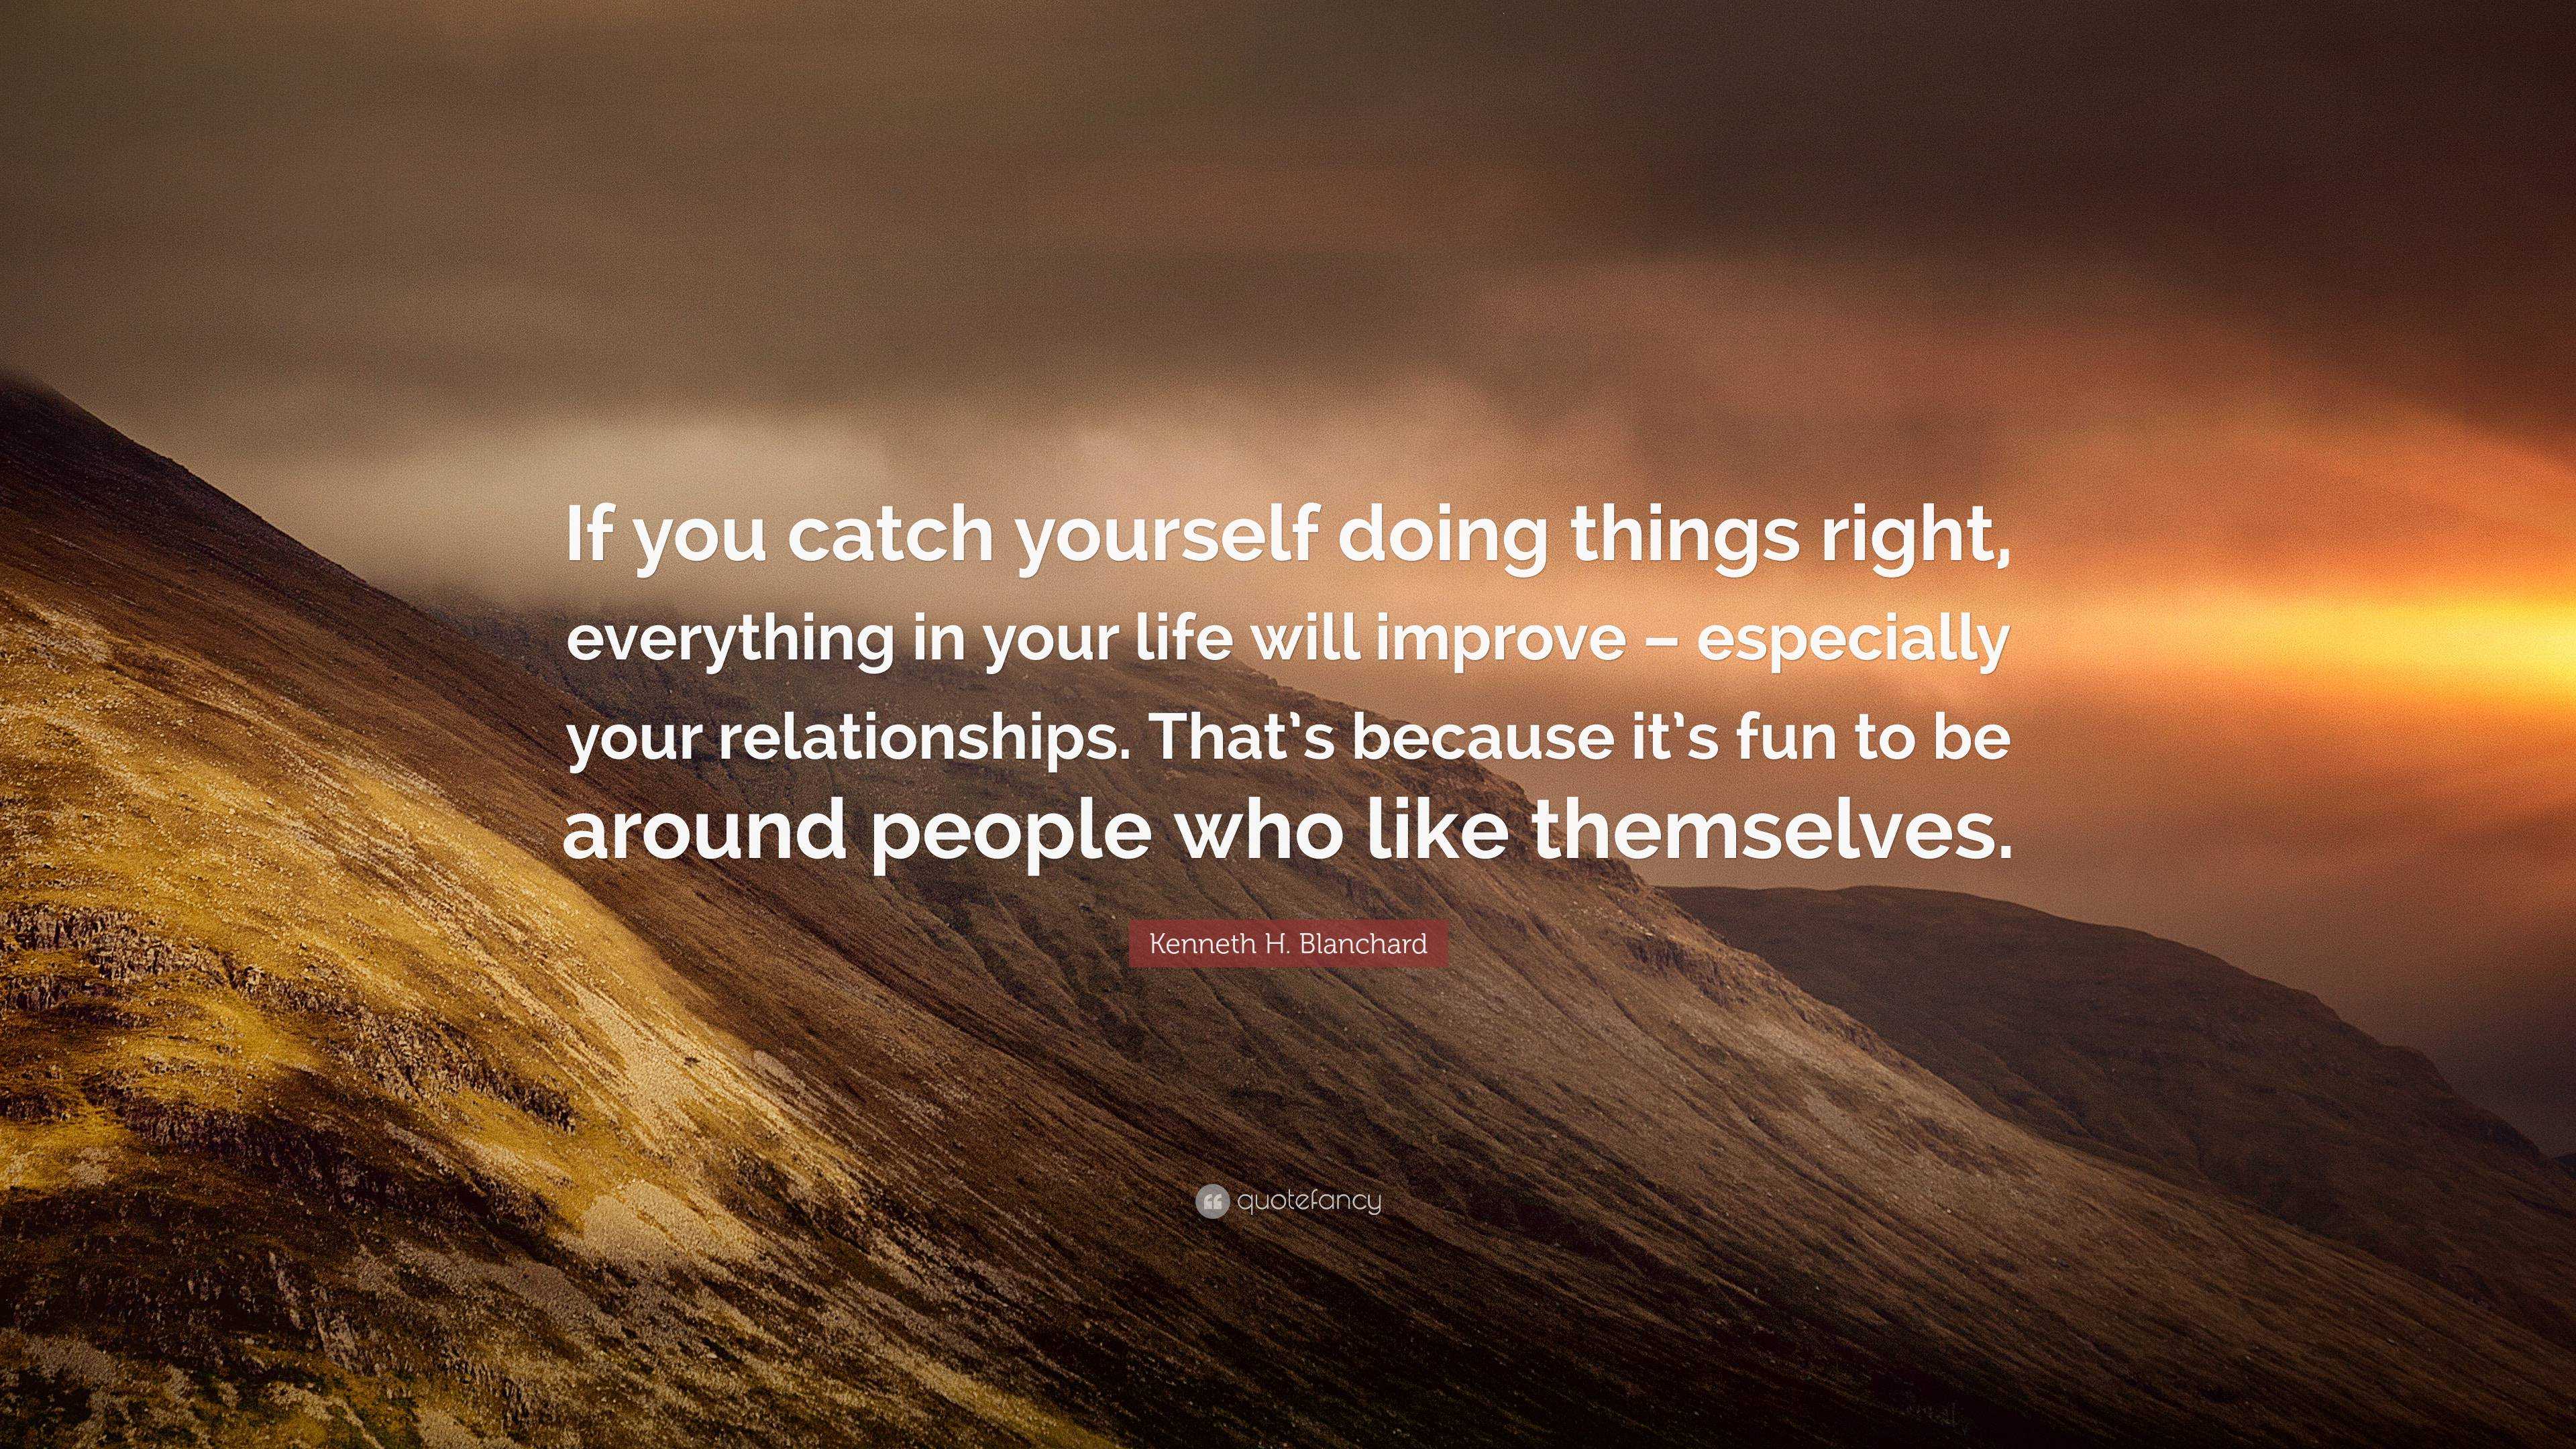 Kenneth H. Blanchard Quote: “If you catch yourself doing things right,  everything in your life will improve – especially your relationships.  That's b”